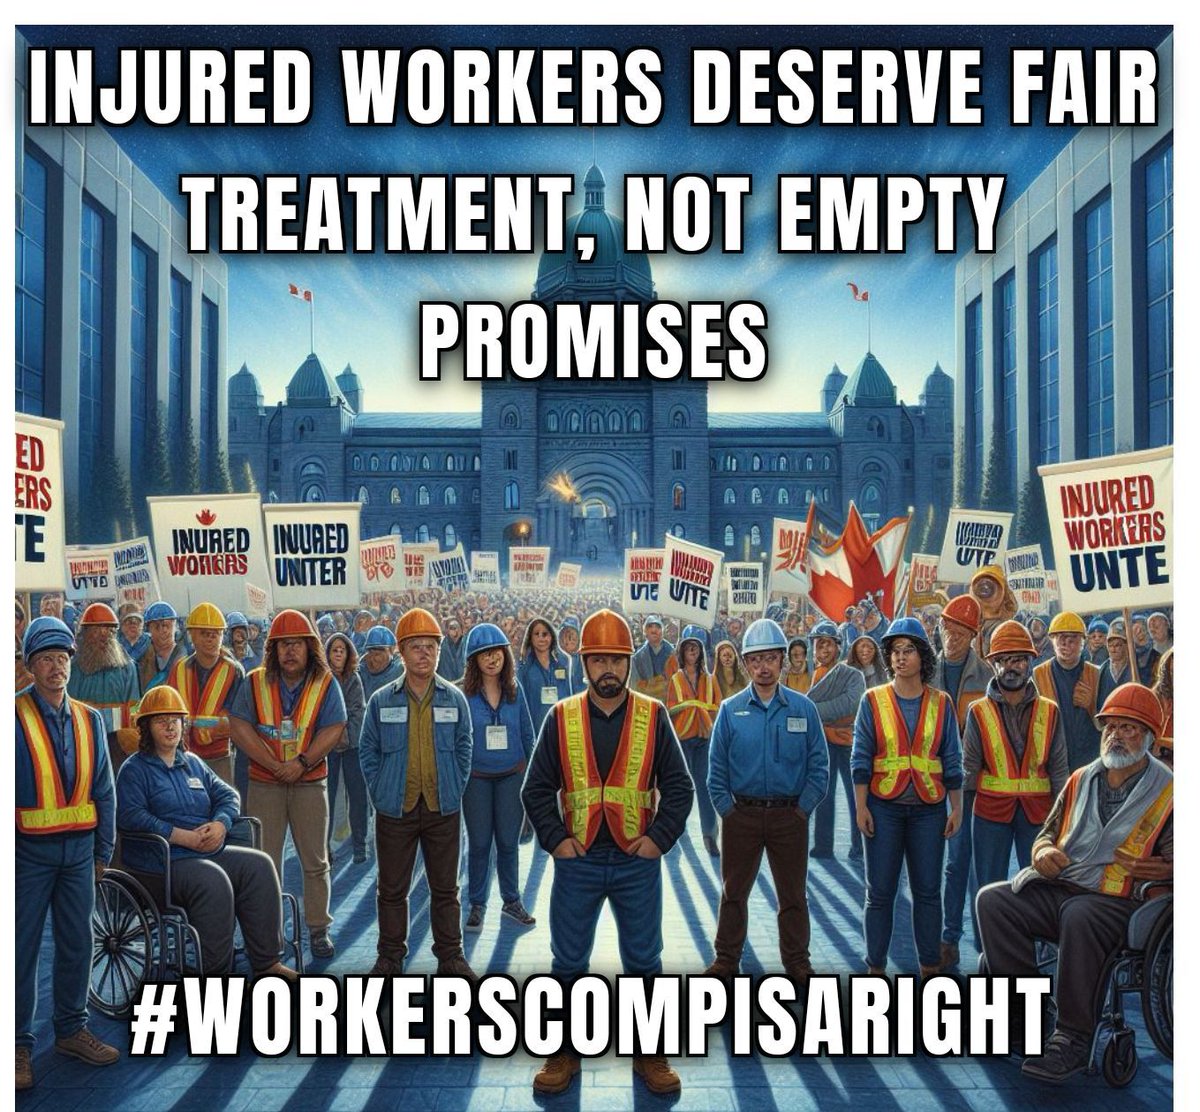 Injured workers deserve fair treatment, not empty promises. It's time to turn promises into action! #WorkersCompIsARight #FairTreatment #InjuredWorkers